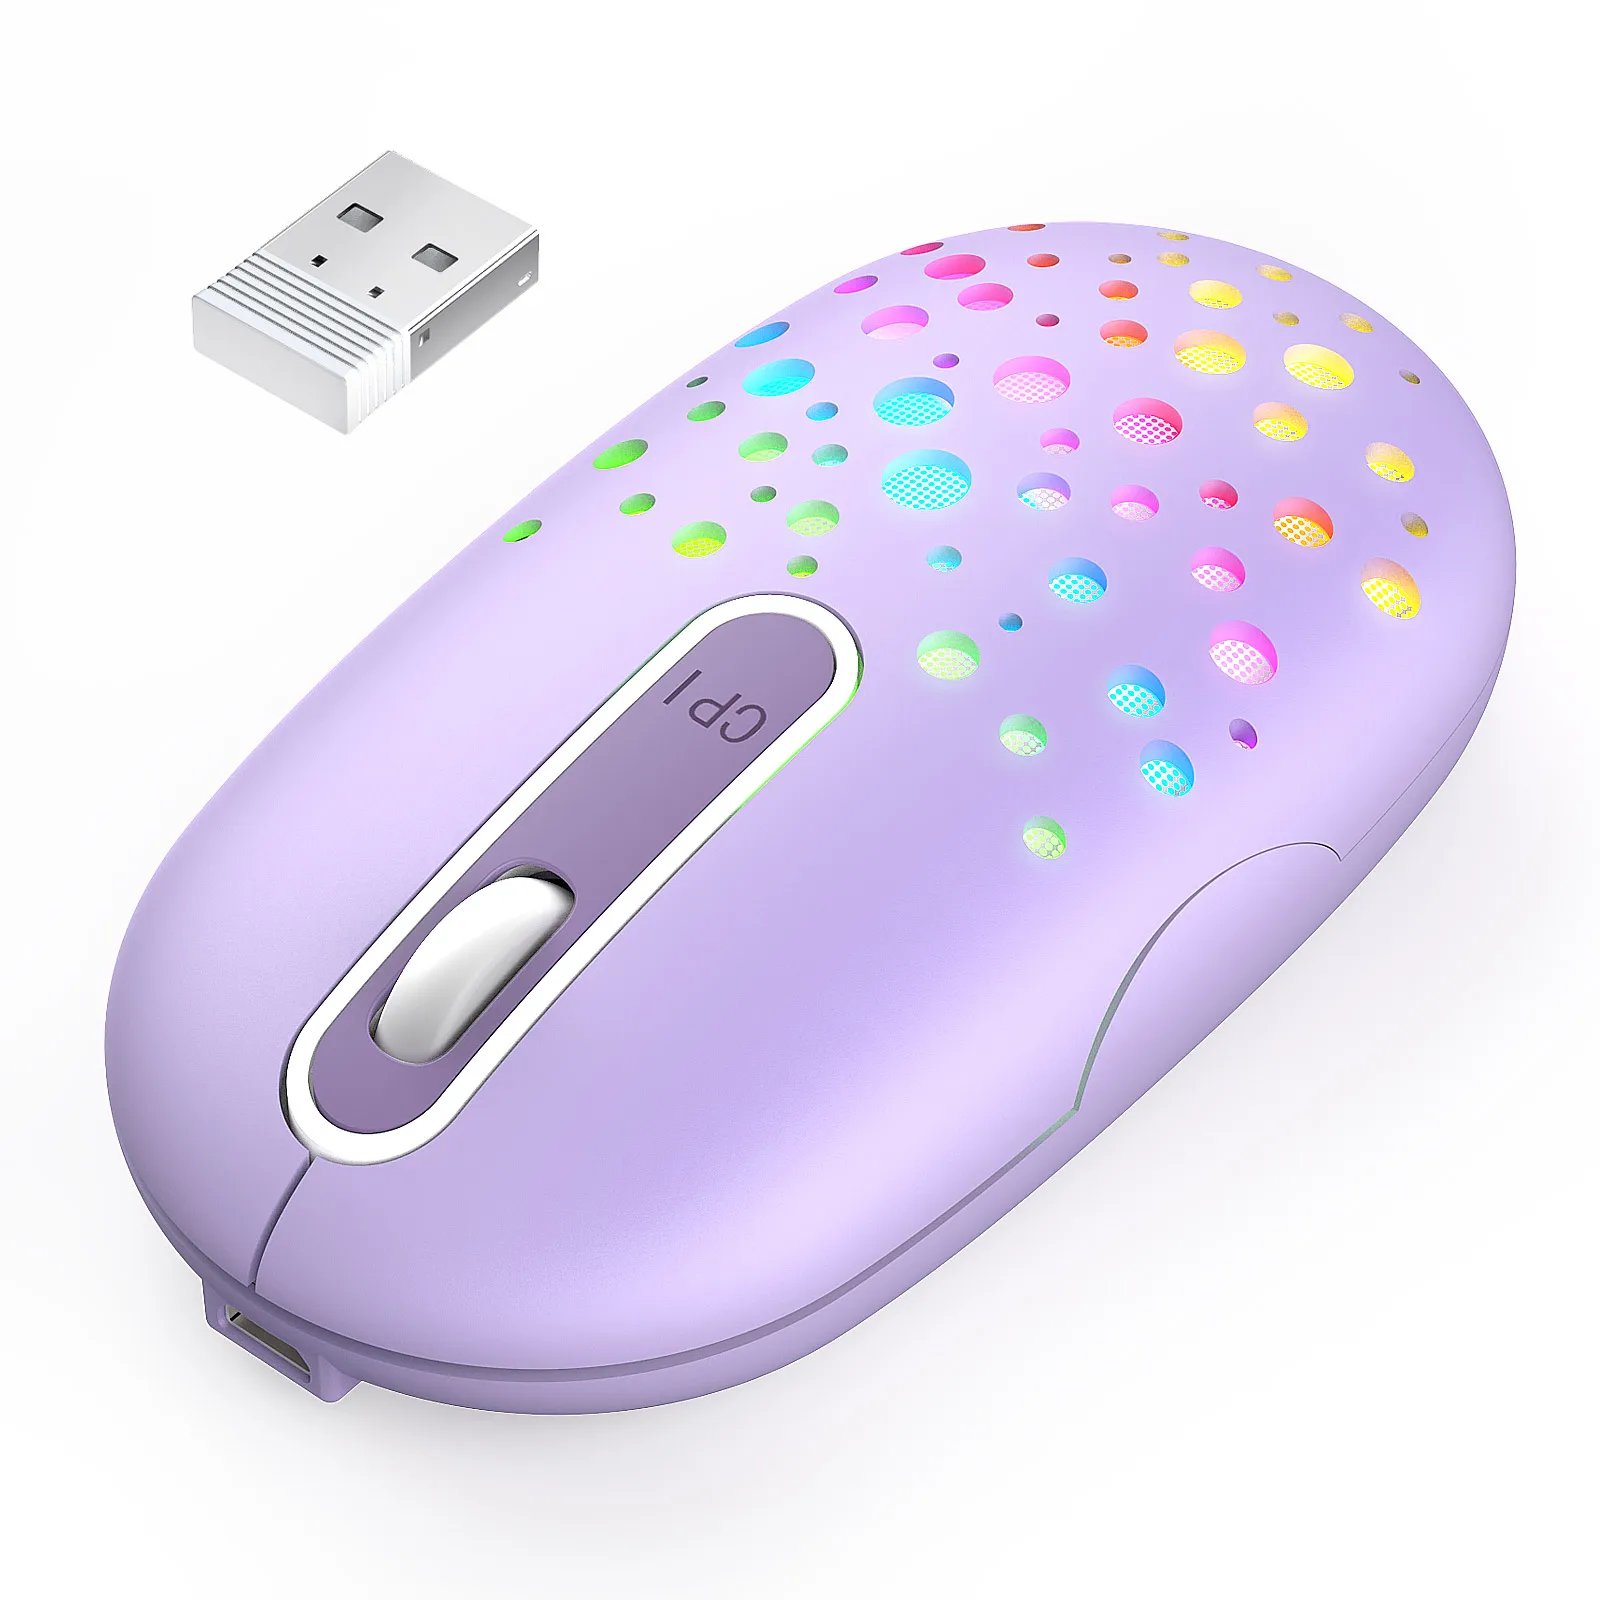 

LED Optical Slim USB Mice with Honeycomb Shell Rechargeable Silent Click for PC Laptop Computer Portable Backlit Wireless Mouse